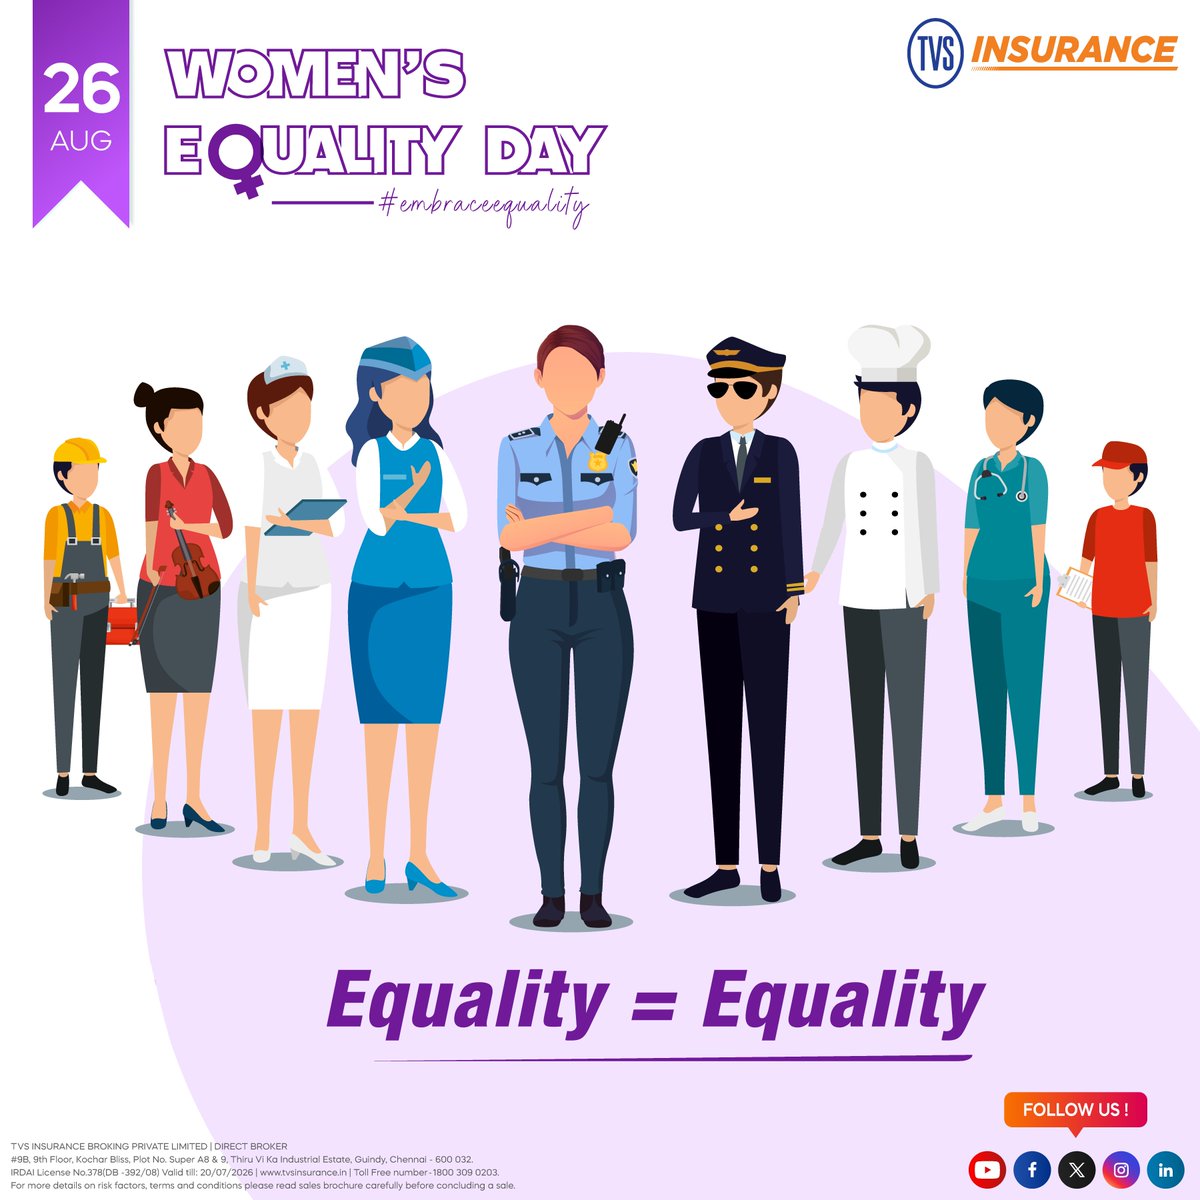 Embracing Equality on Women's Equality Day! Let's celebrate the progress, honor the trailblazers, and continue the journey towards a world of true parity.  #tvsinsurance #womenequalityday #feminismmatters #genderequality #womenempowerment #equalityforall #inclusionmatters